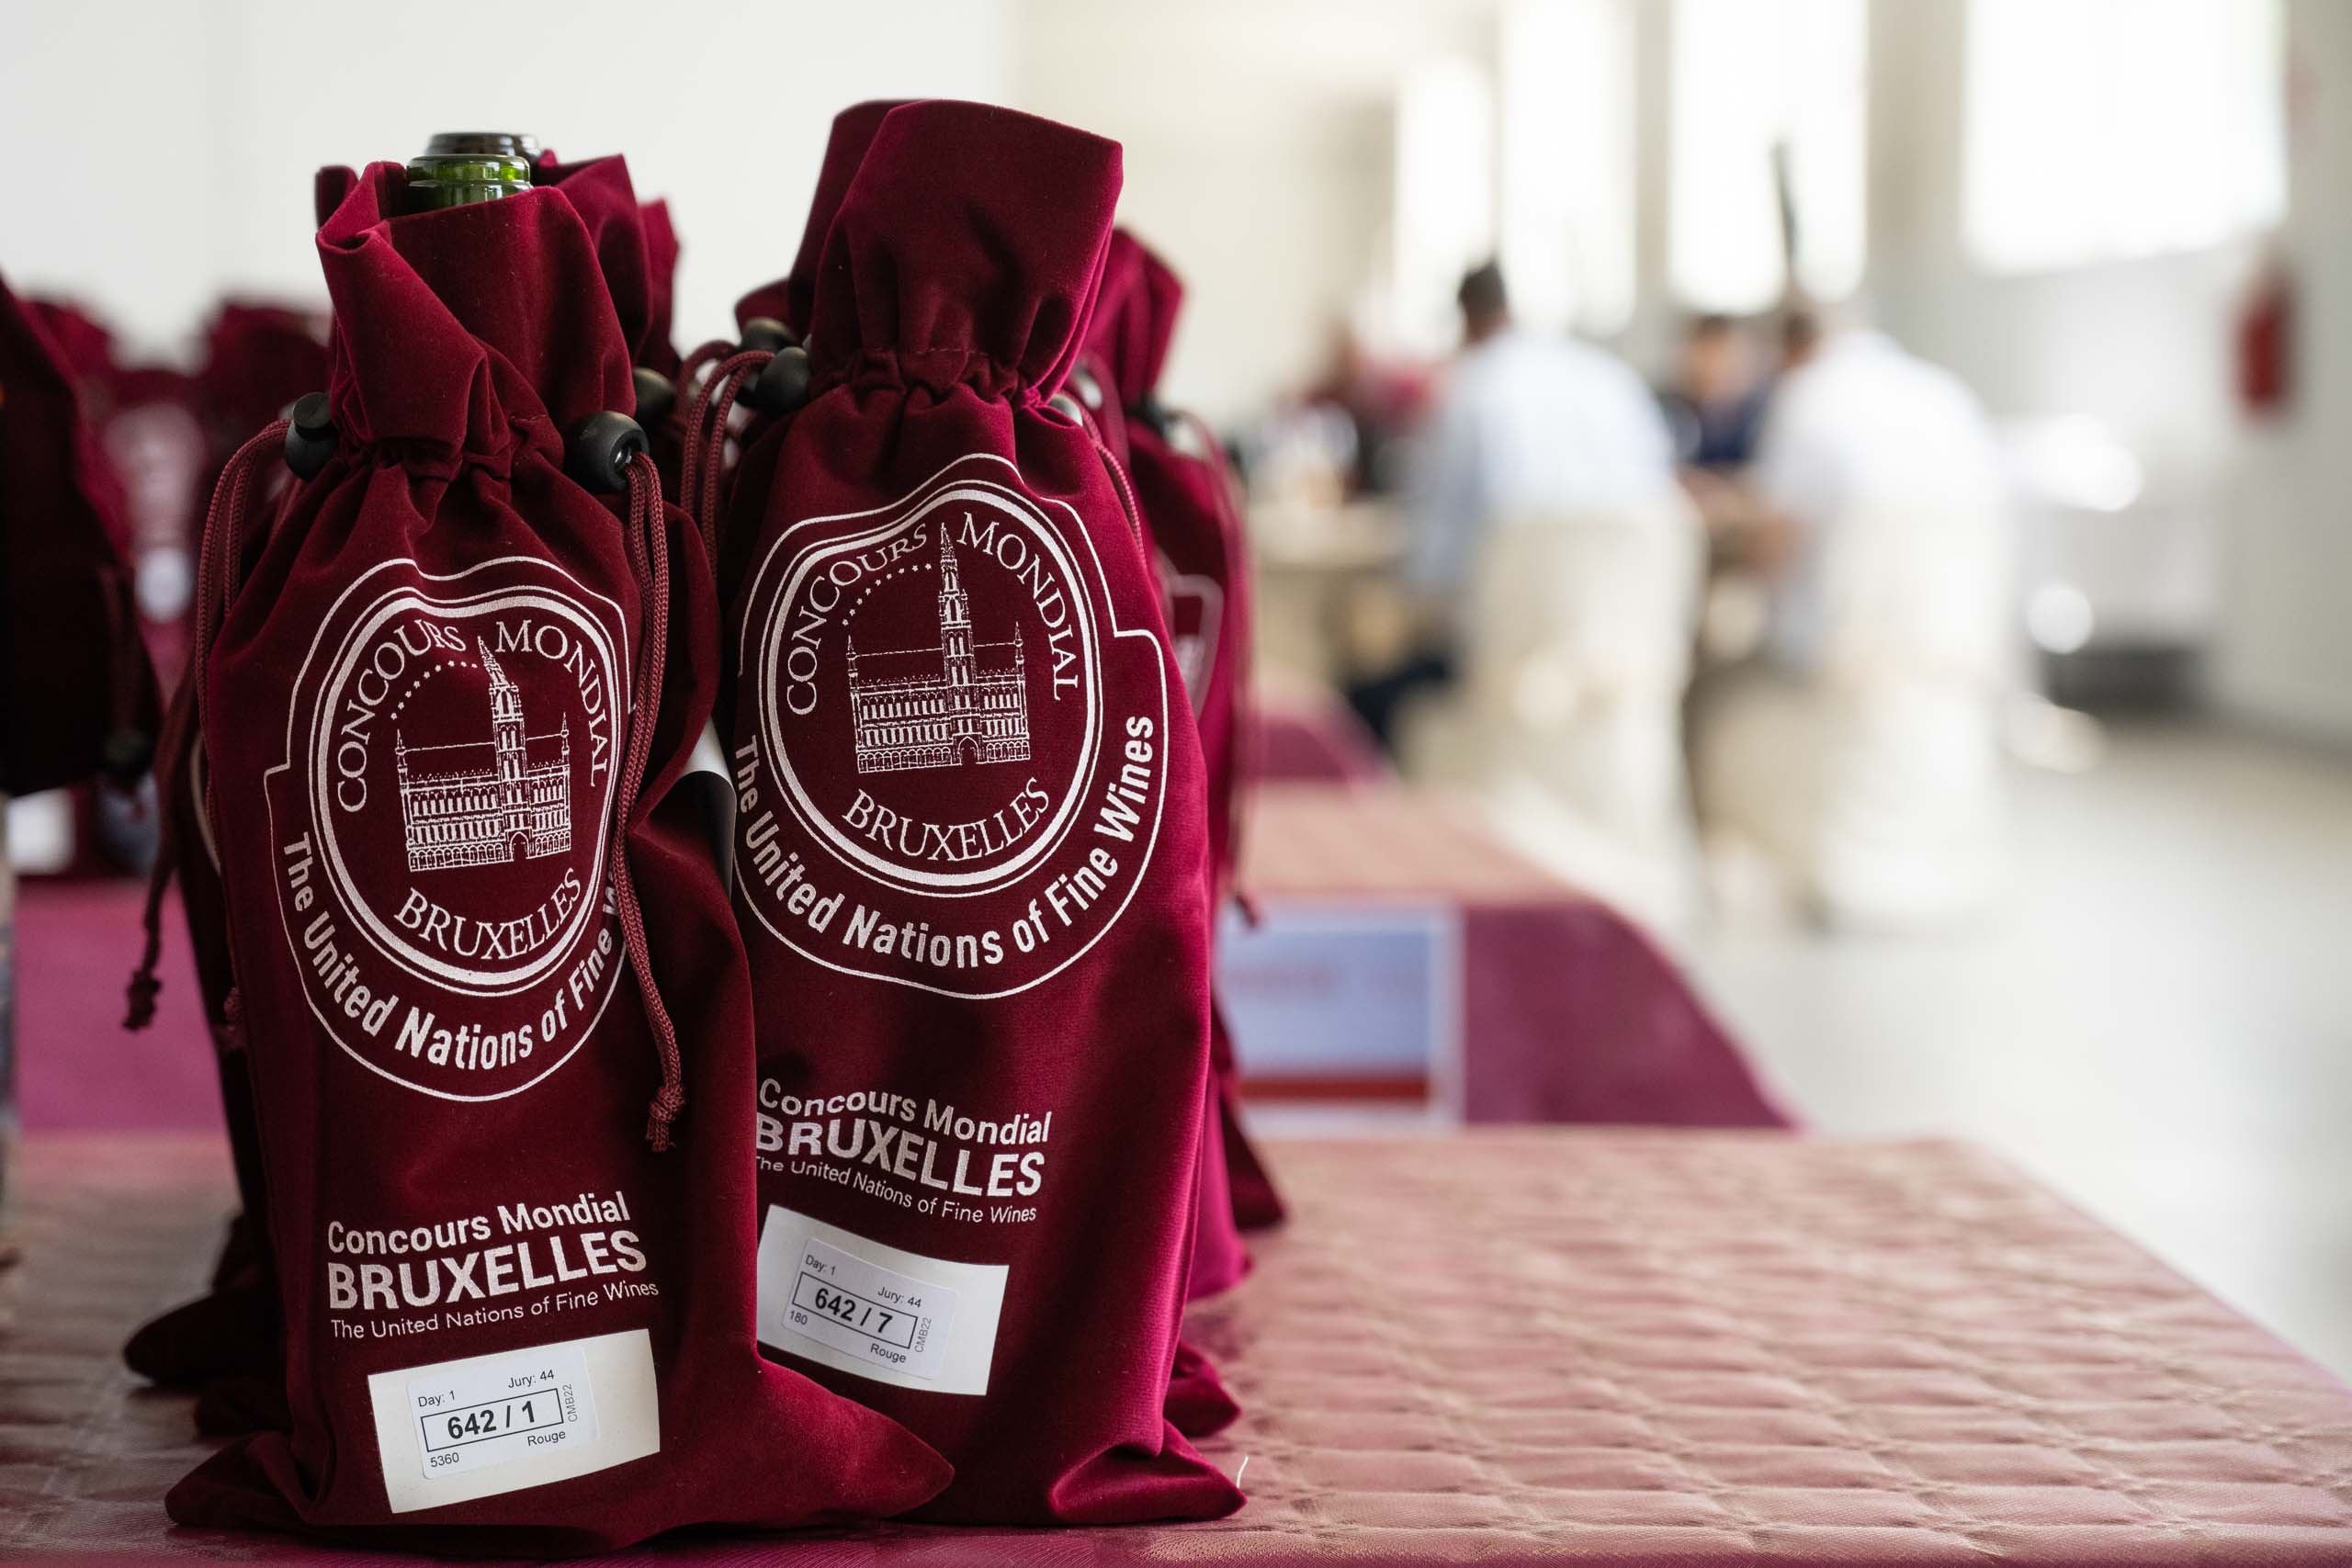 Marsala, in Sicily, to host the first Sweet and Fortified Wine Session of the Concours Mondial de Bruxelles